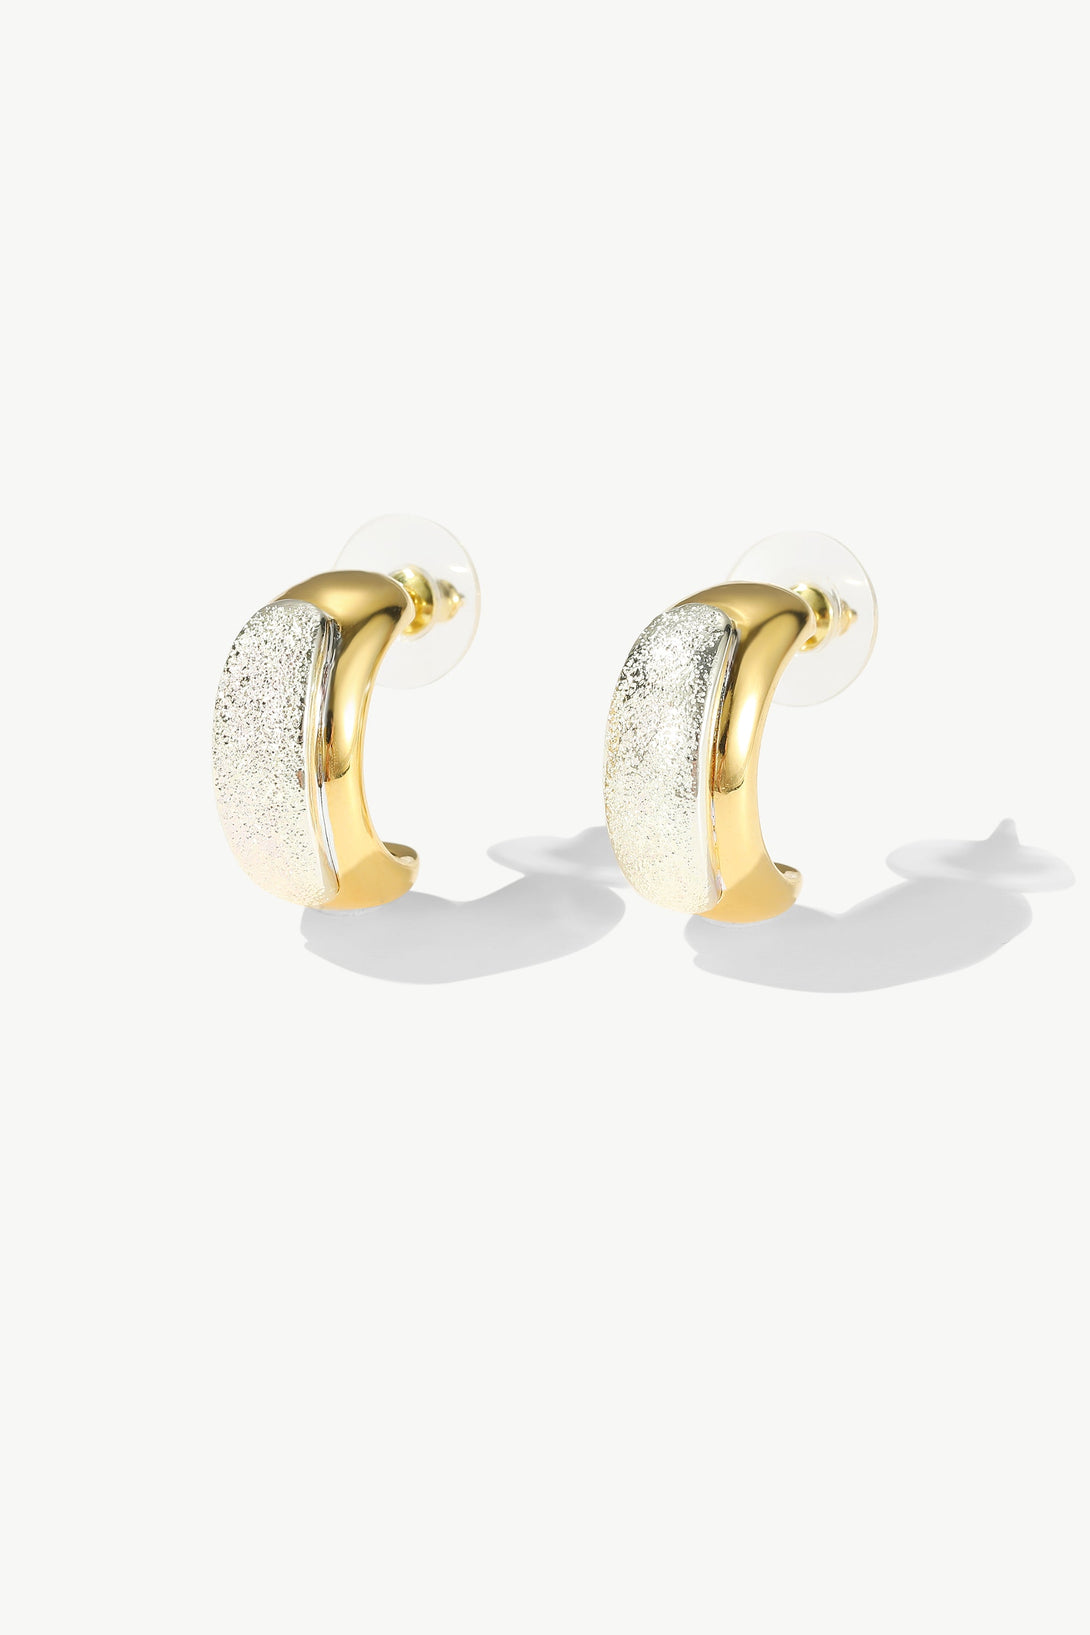 Frosted and Matted Texture Two Tone Hoop Earrings - Classicharms